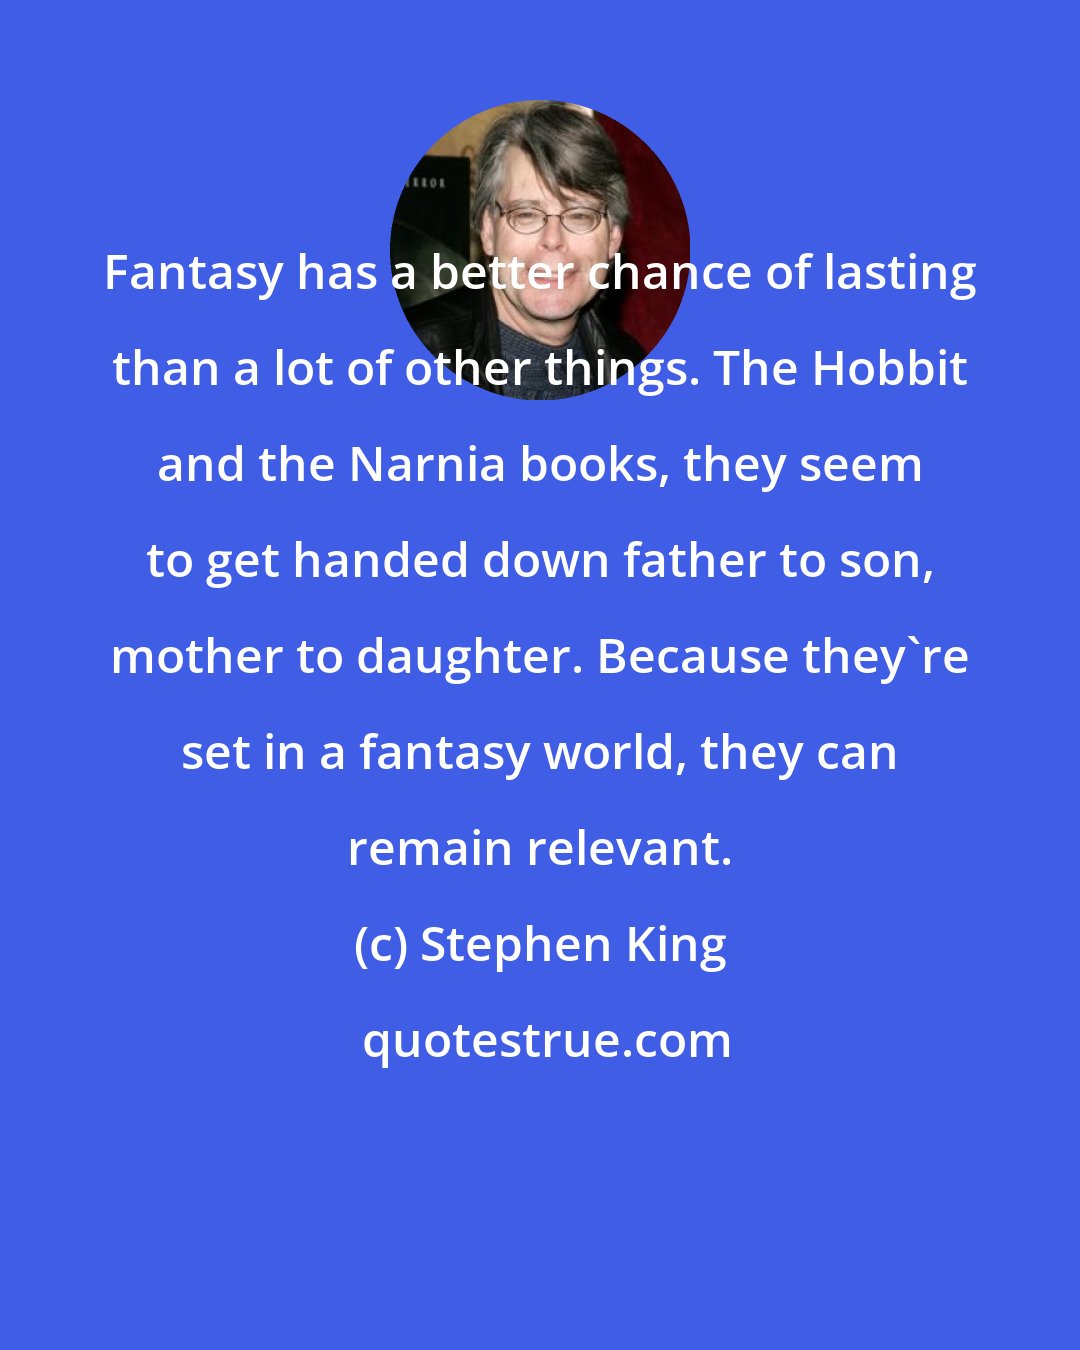 Stephen King: Fantasy has a better chance of lasting than a lot of other things. The Hobbit and the Narnia books, they seem to get handed down father to son, mother to daughter. Because they're set in a fantasy world, they can remain relevant.